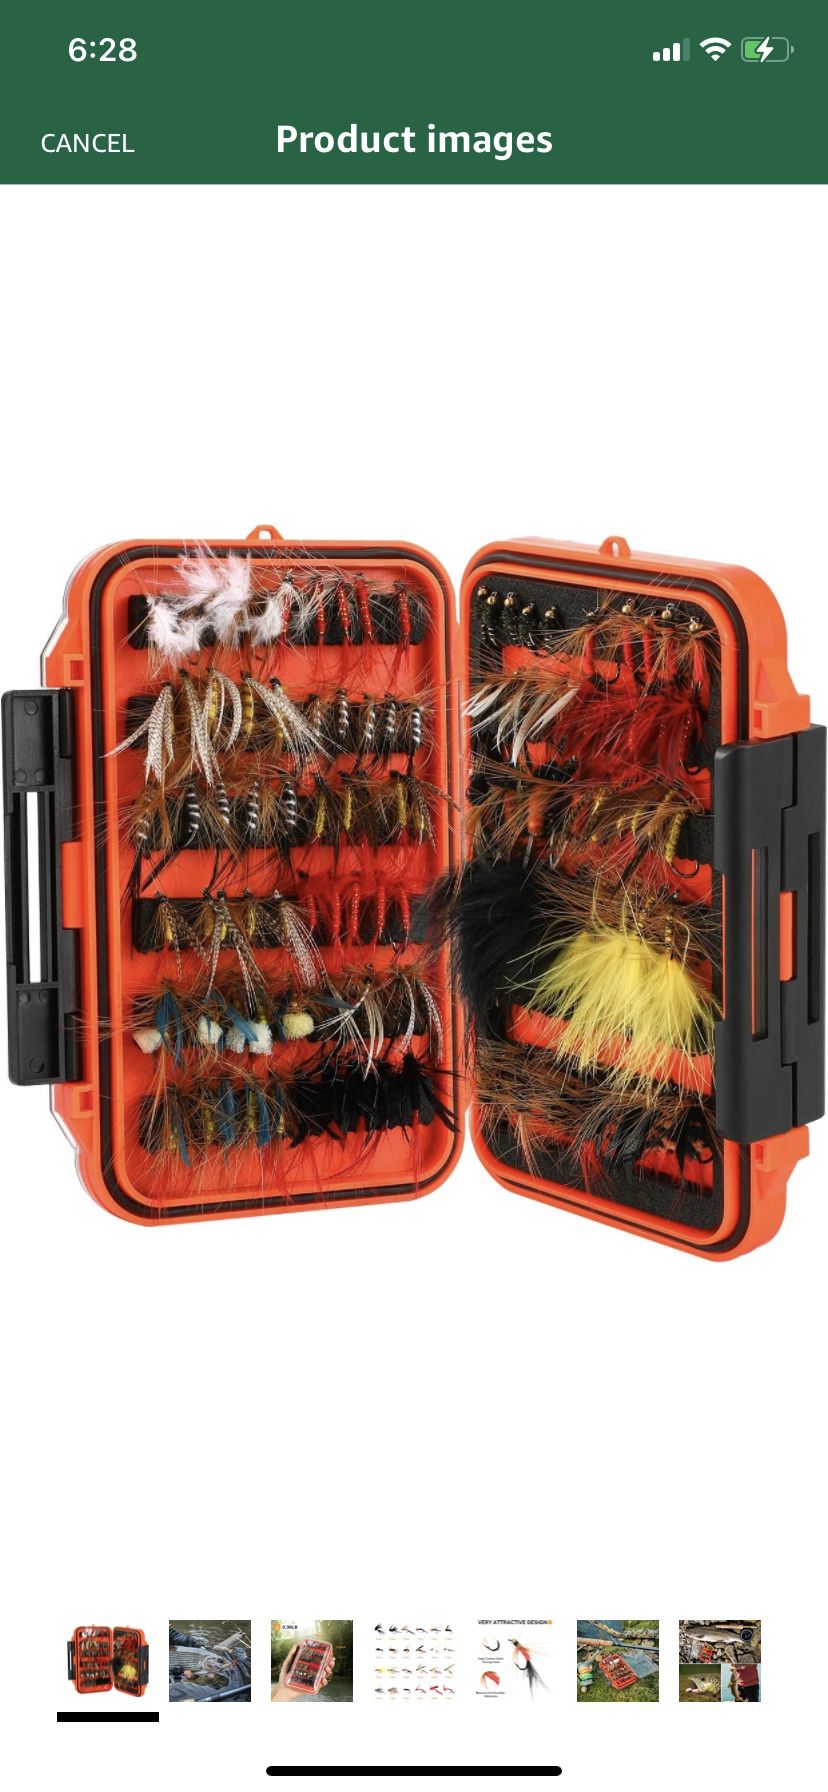 120 Pack Fly Fishing Flies Kit with Box, Dry Wet Flies, Nymphs, Streamers for Bass Salmon Trout Fishing